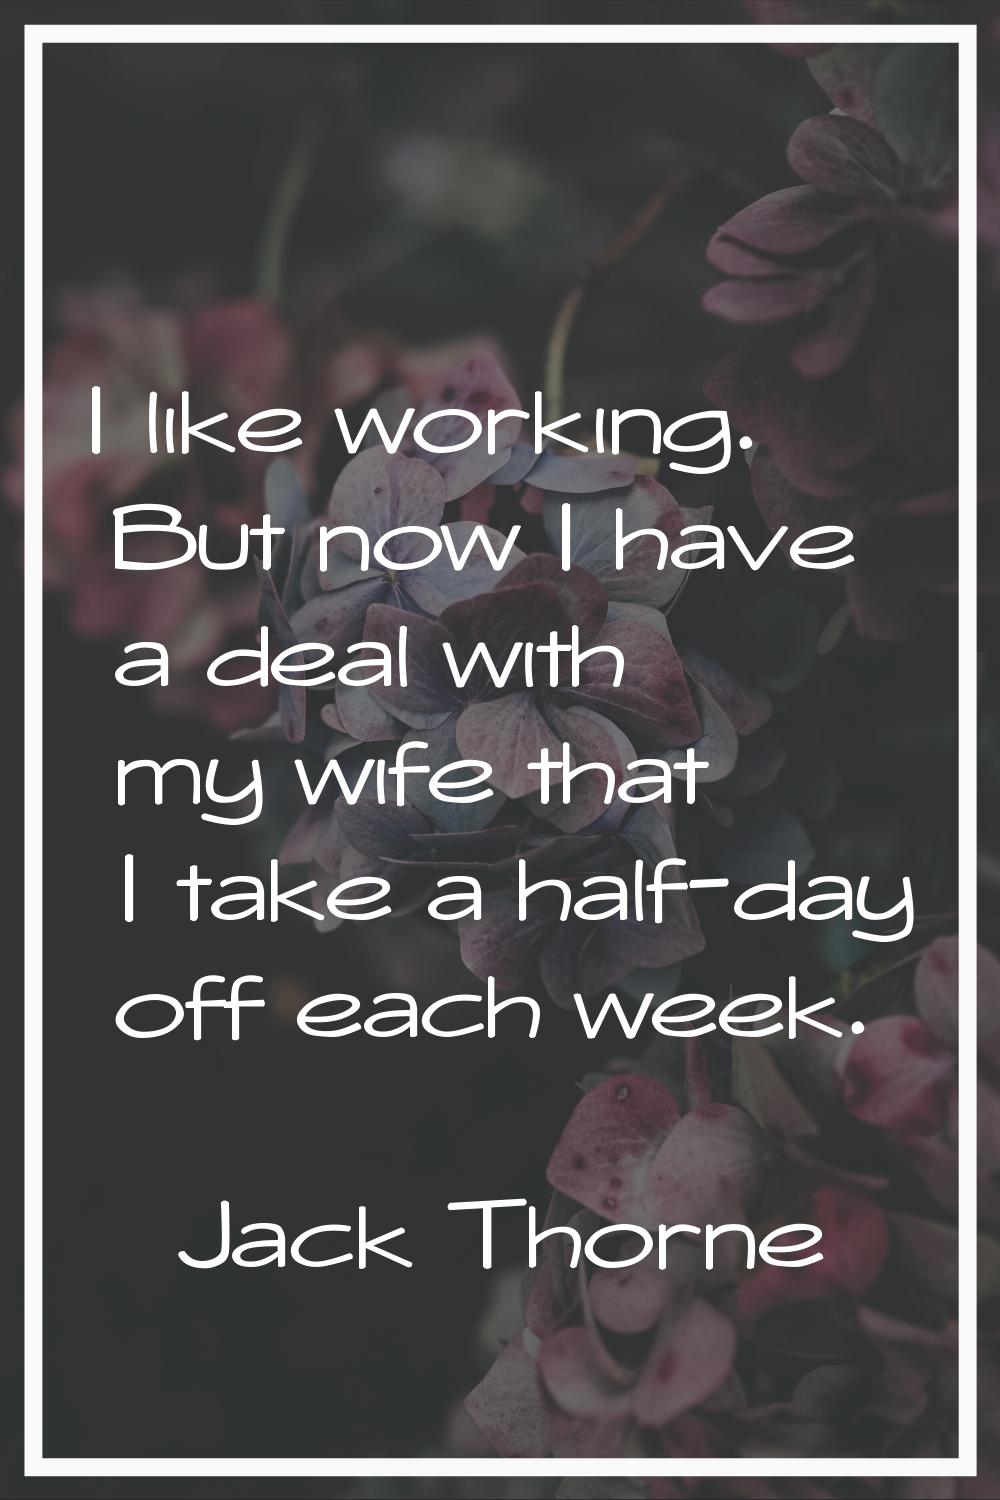 I like working. But now I have a deal with my wife that I take a half-day off each week.